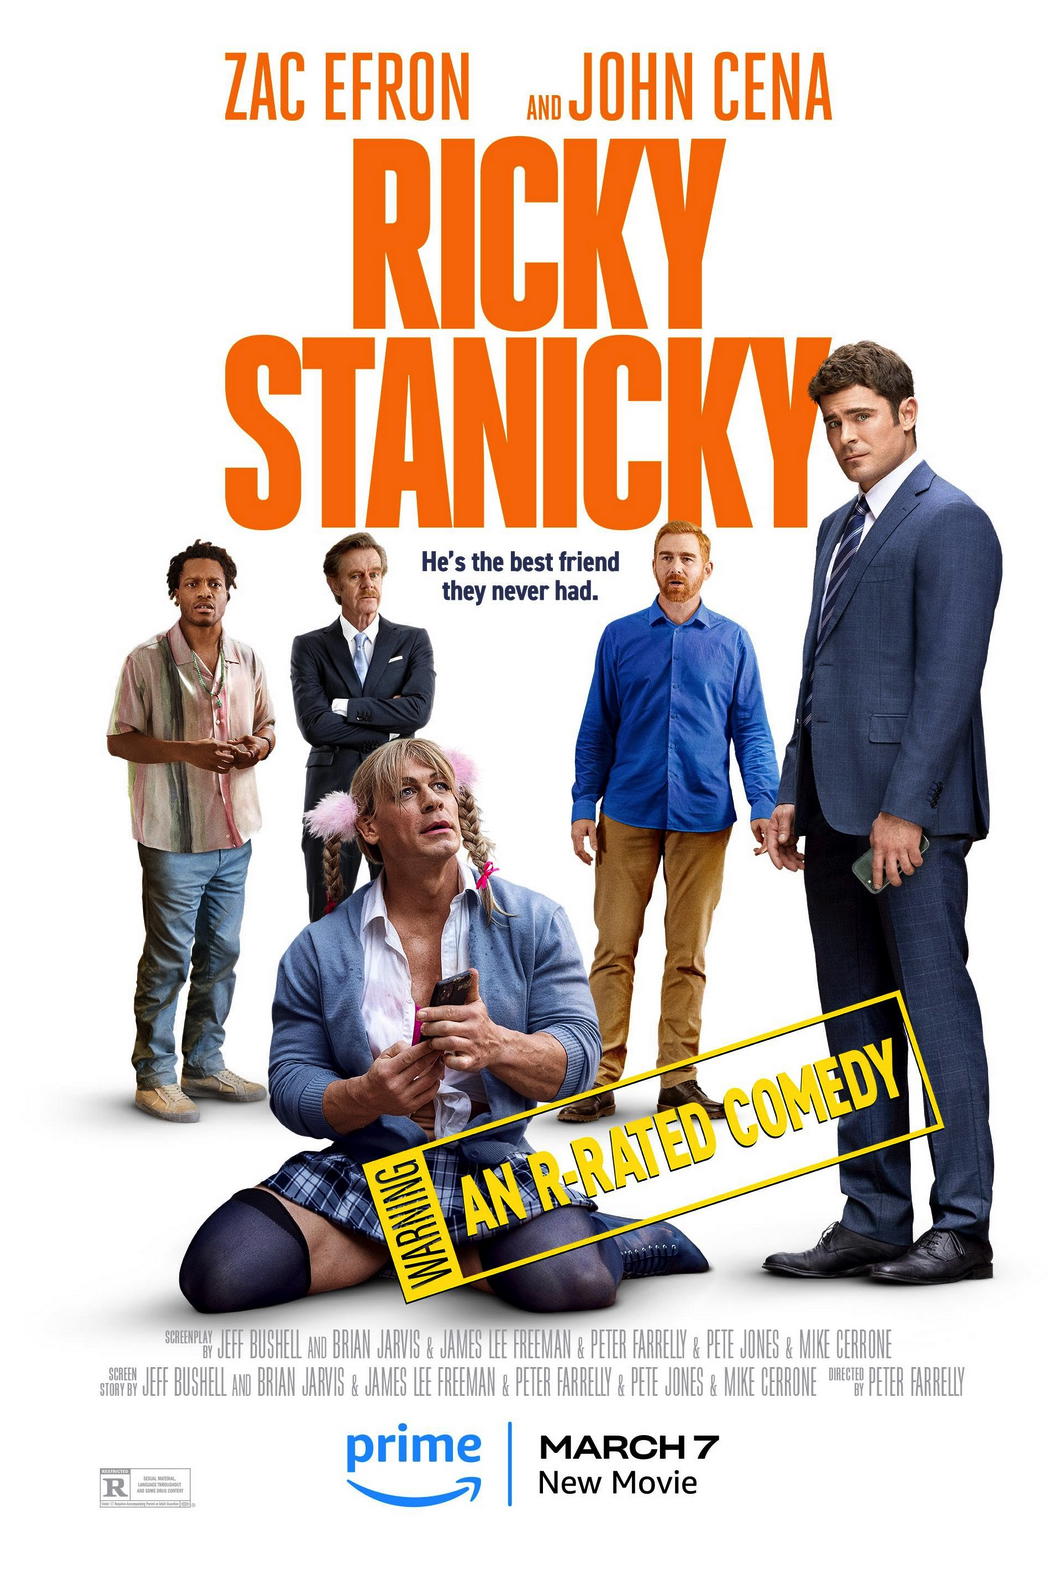 The official movie poster for RICKY STANICKY, starring Zac Efron and John Cena. (Photo Credit: Amazon MGM Studios)